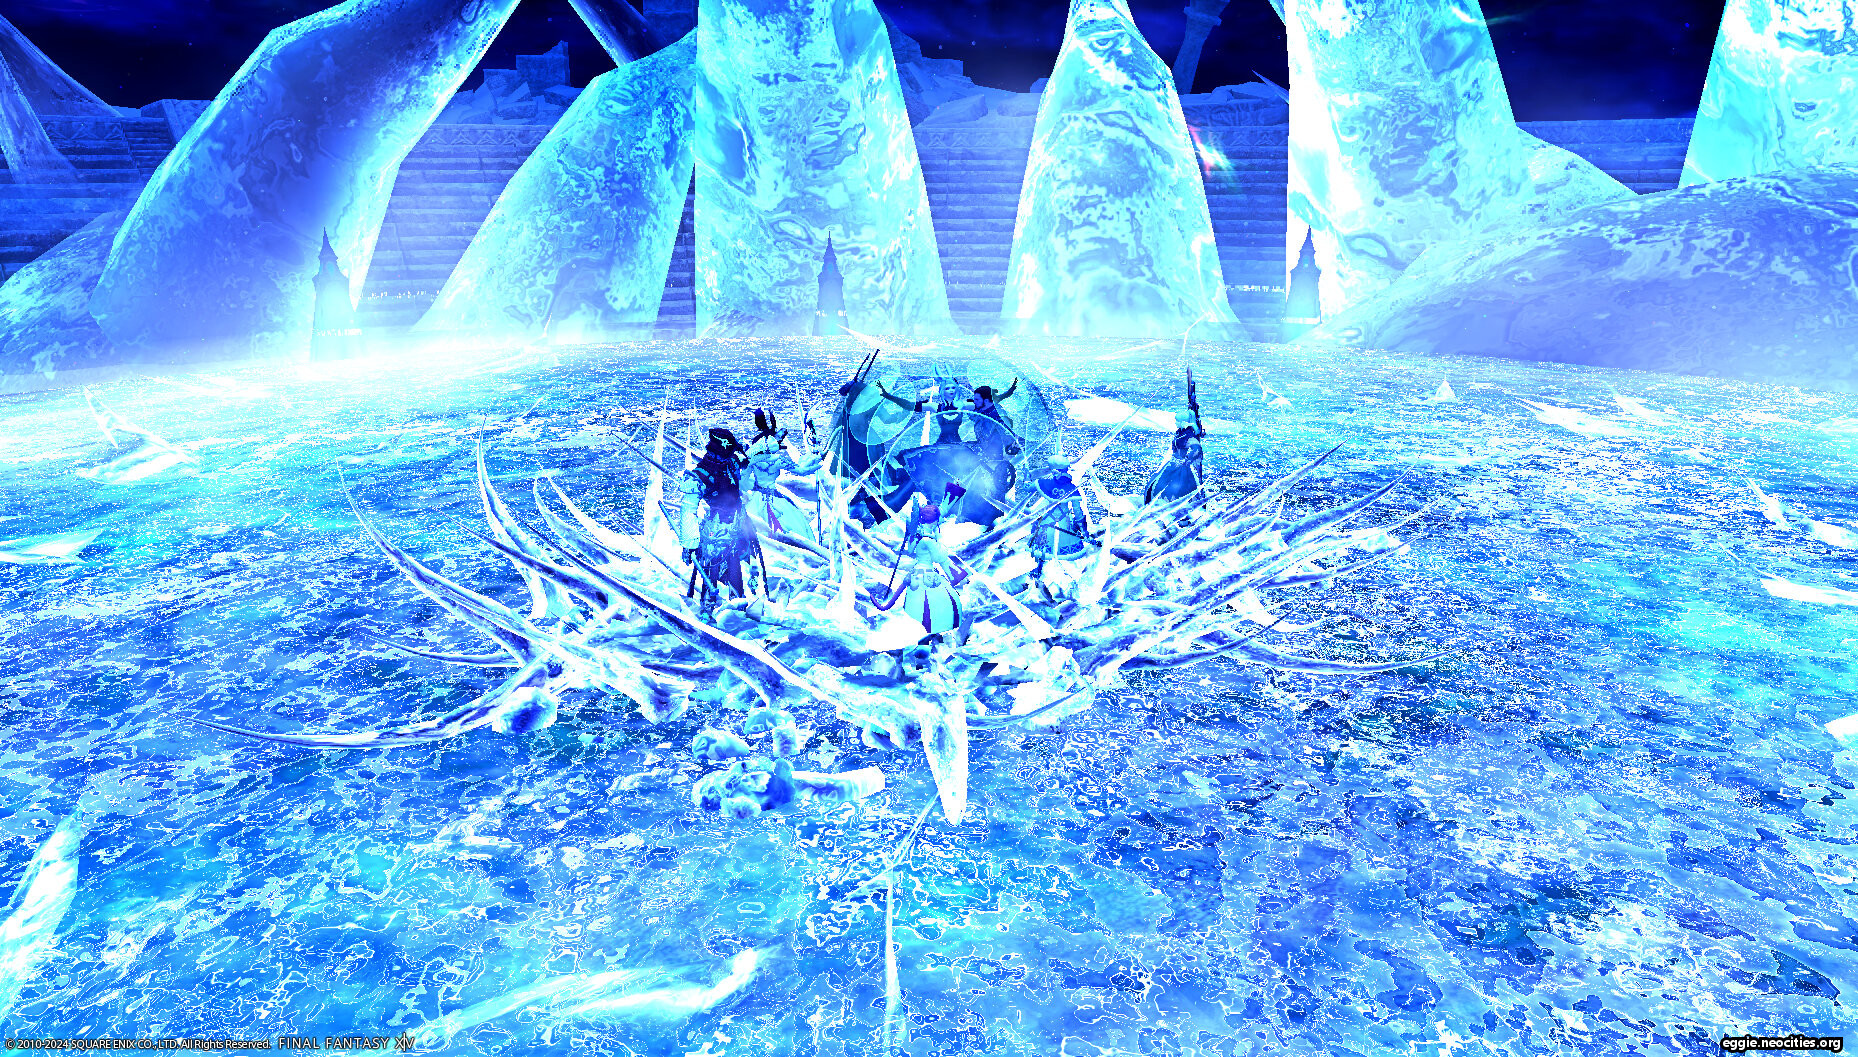 Zel several blue mages frozen by Shiva during the phase change